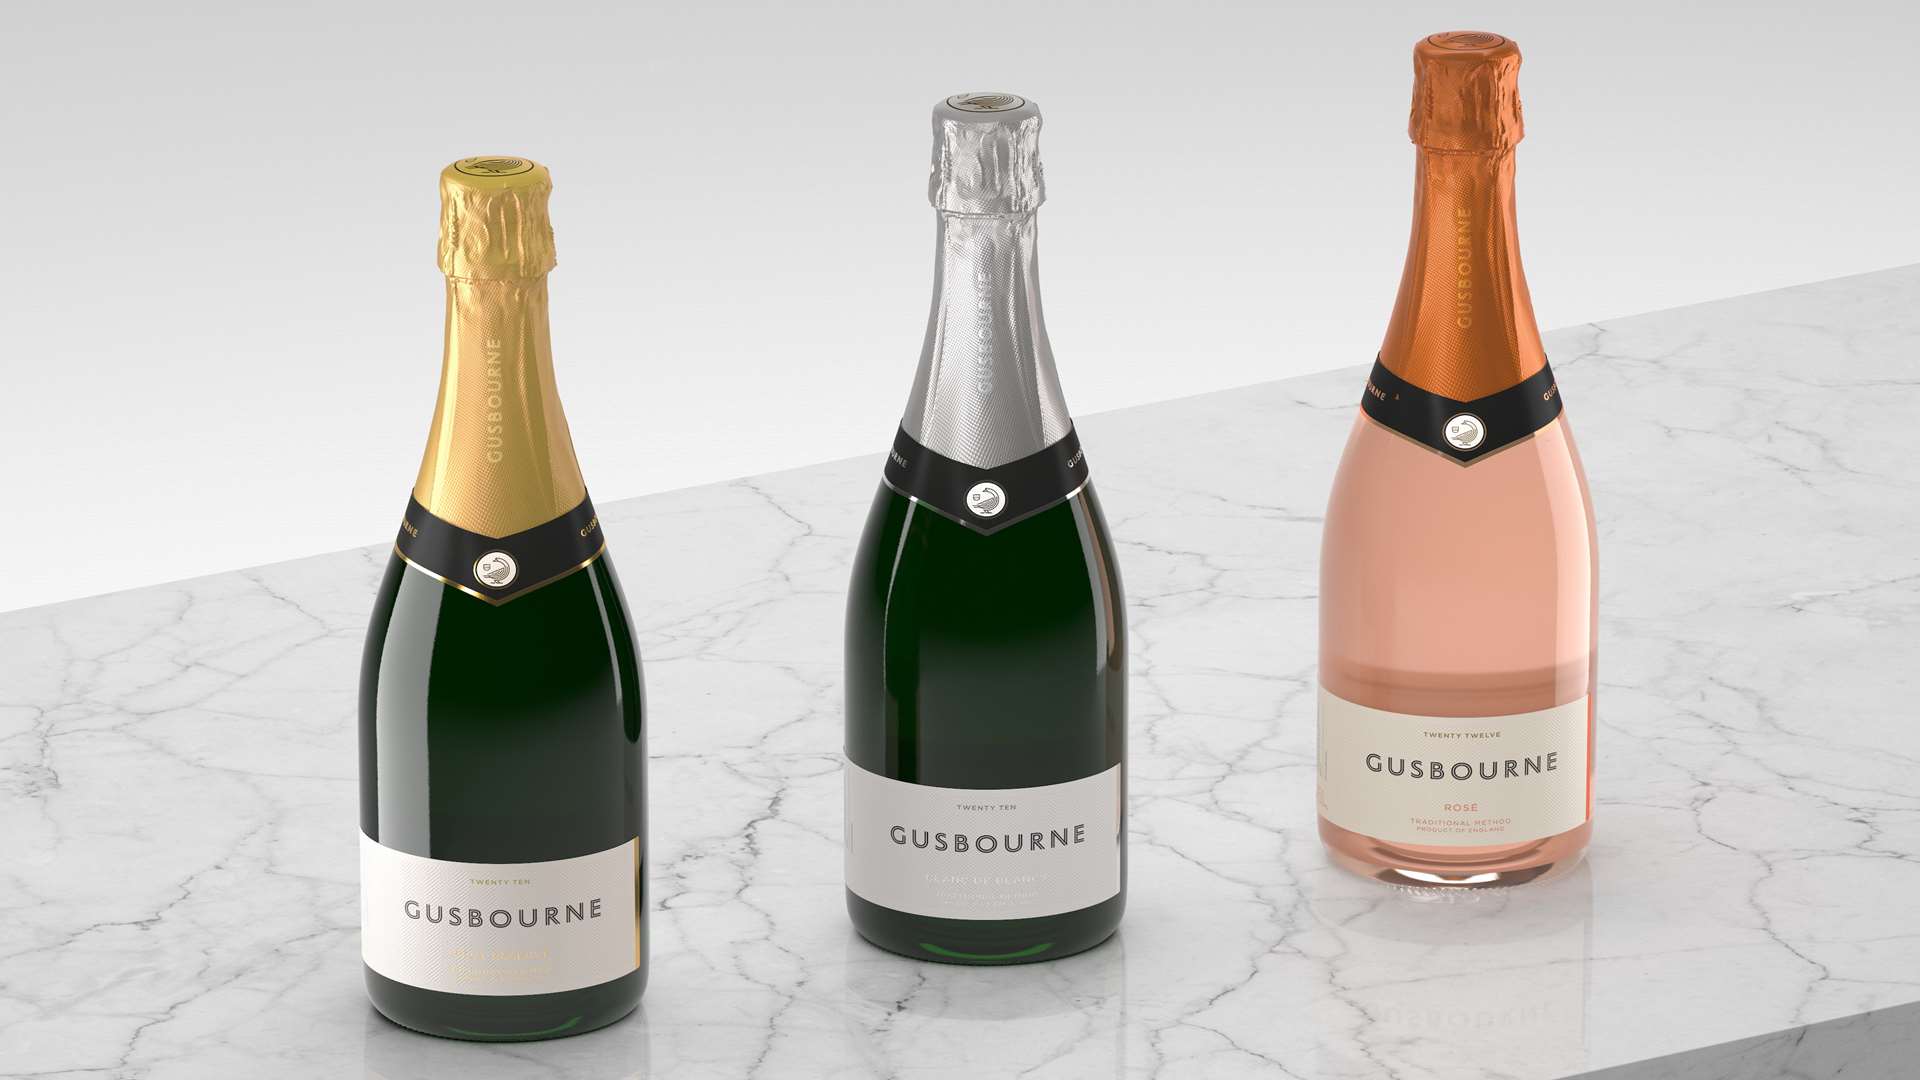 Gusbourne wines have won several awards in the first half of the year